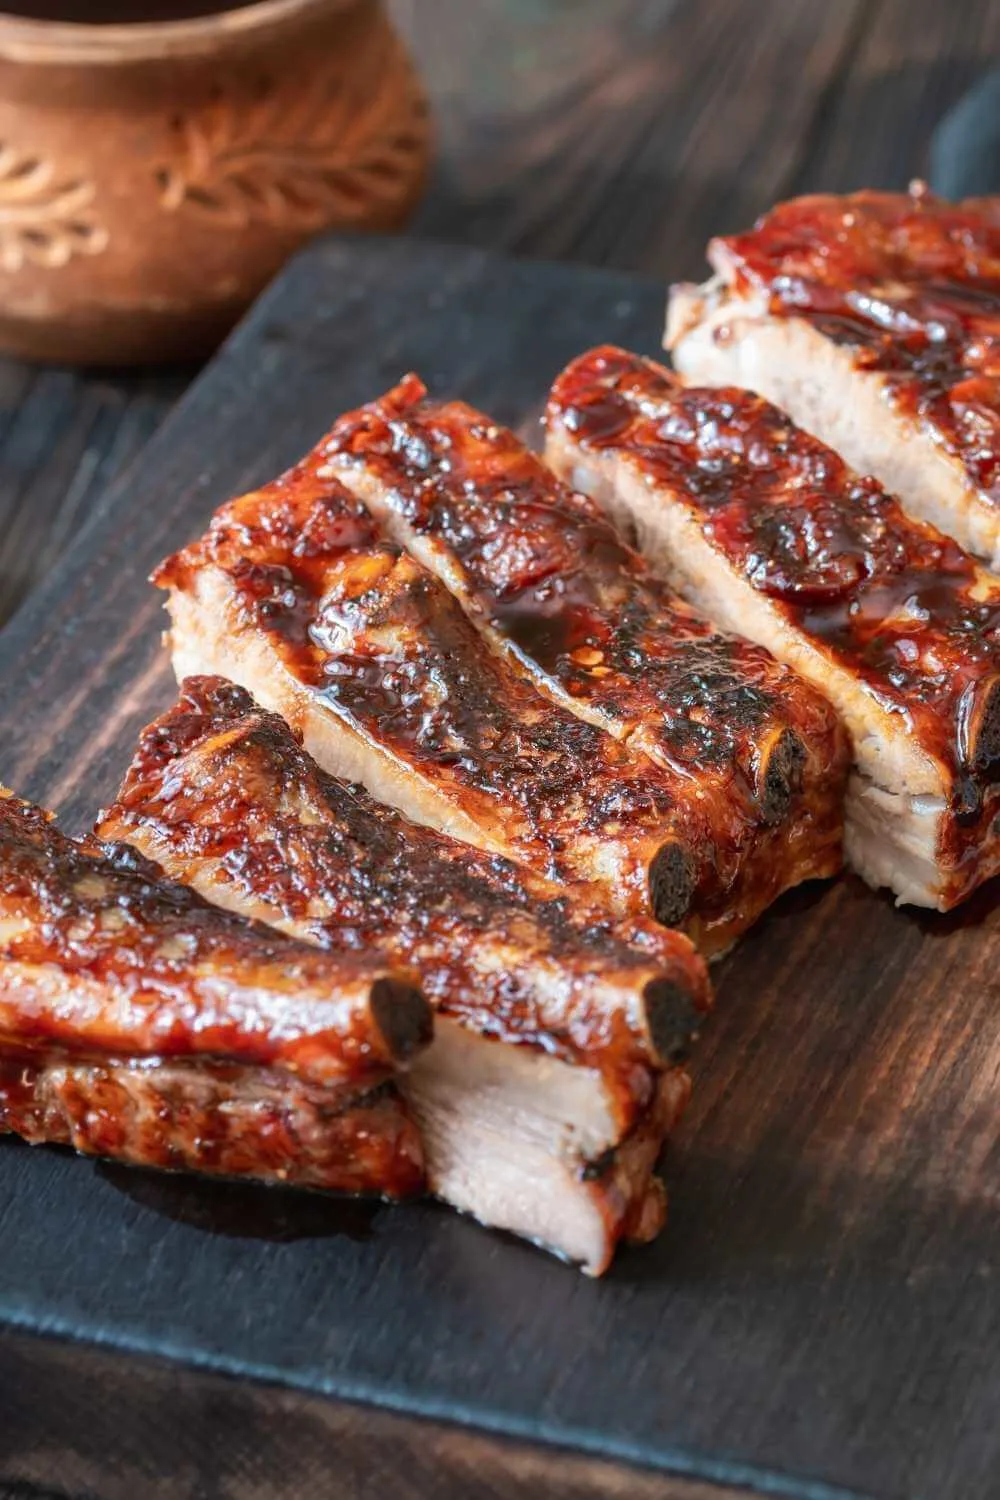 How Long To Cook Country-Style Ribs In Oven At 350